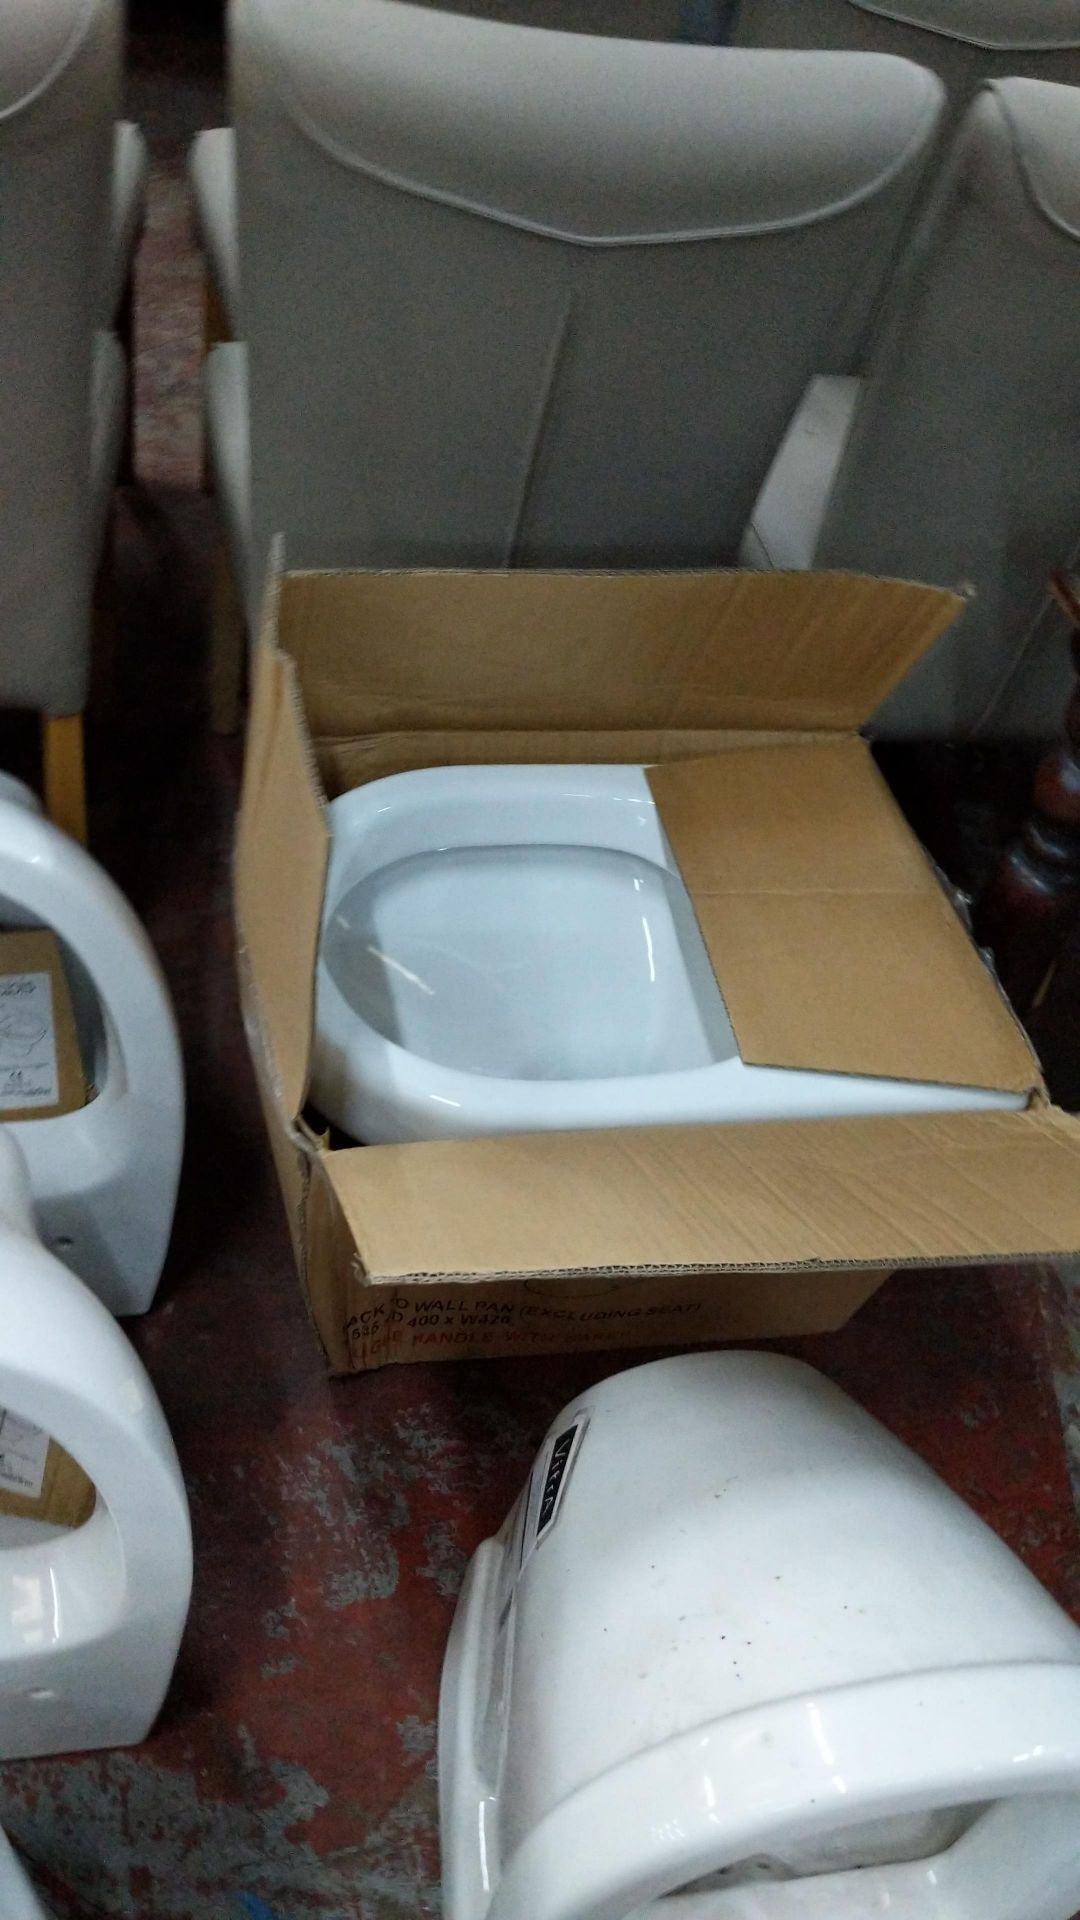 5 assorted back-to-wall WC pans, mostly for wall hanging Lots 100 - 142 & 146 - 167 are being sold - Image 7 of 10